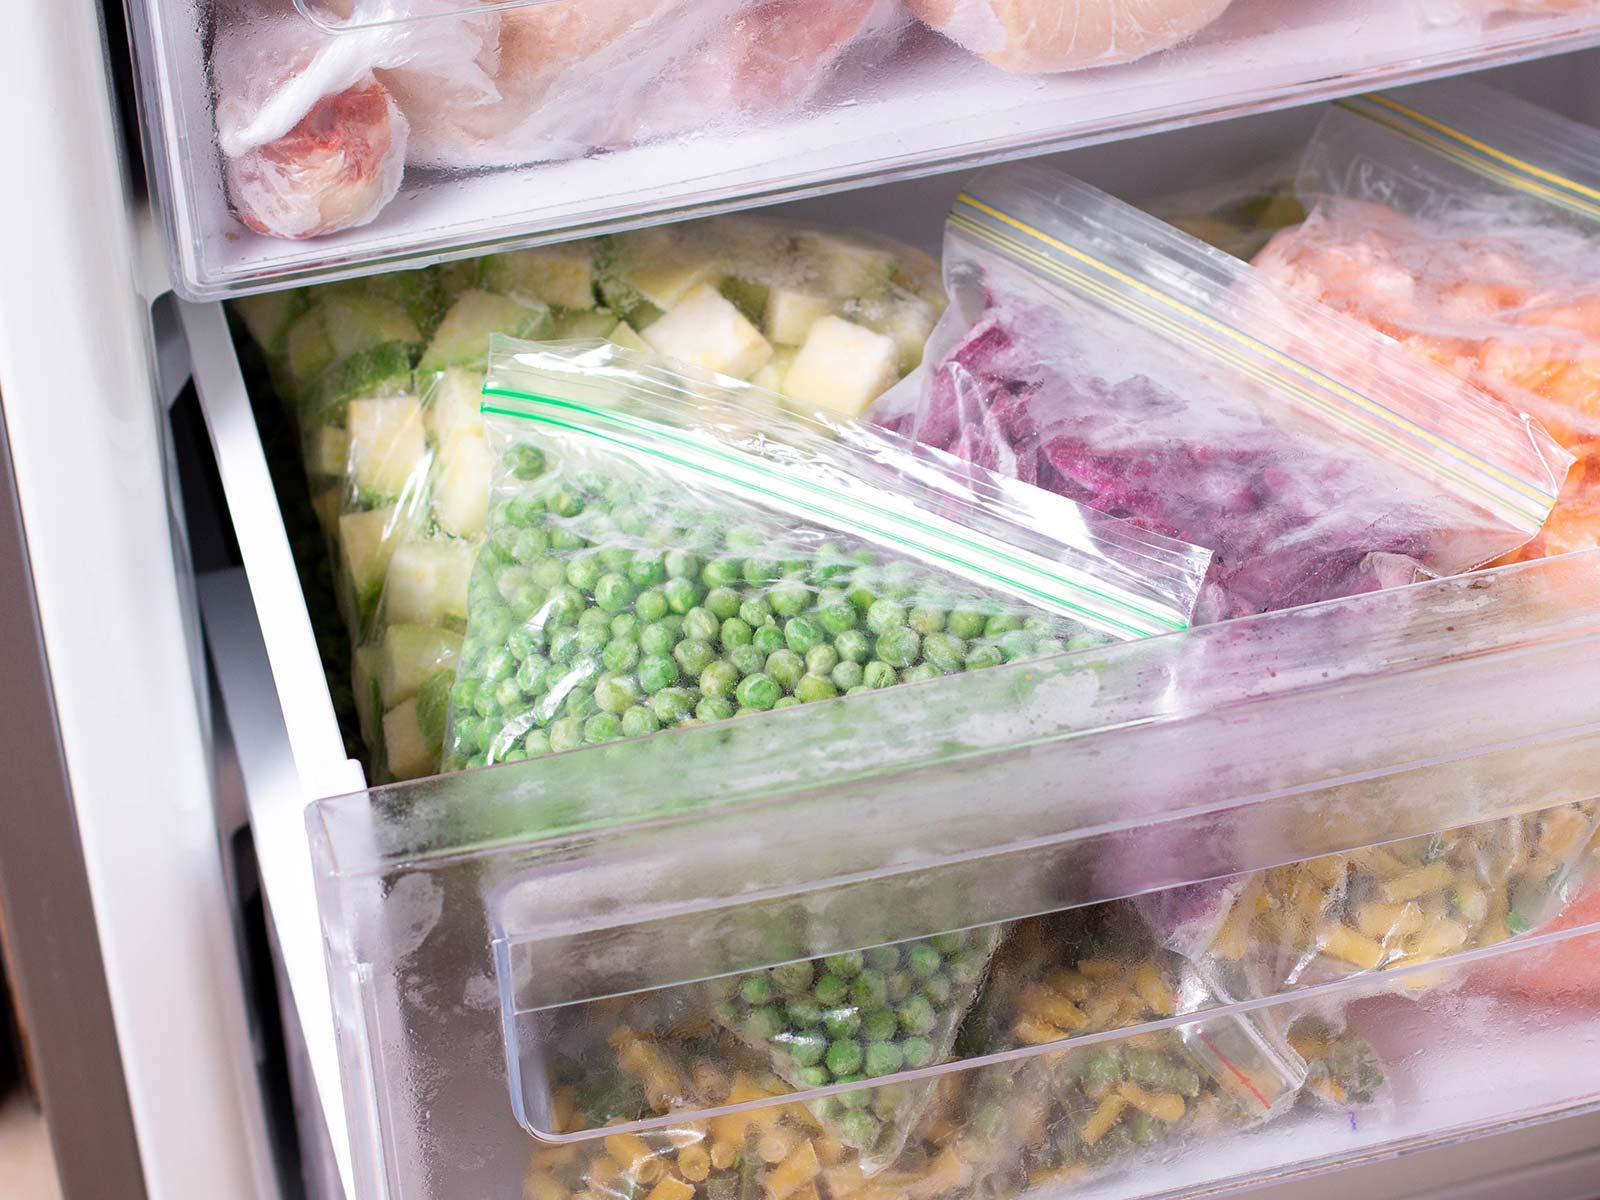 A freezer packed with veggies and food in an efficient way to keep warm air out and food cool. Image on text says: Energy Saving Hacks. Pack your freezer. A full freezer is an efficient freezer. All those frozen items will help cool down any warm air that sneaks in when you're getting something out of it.